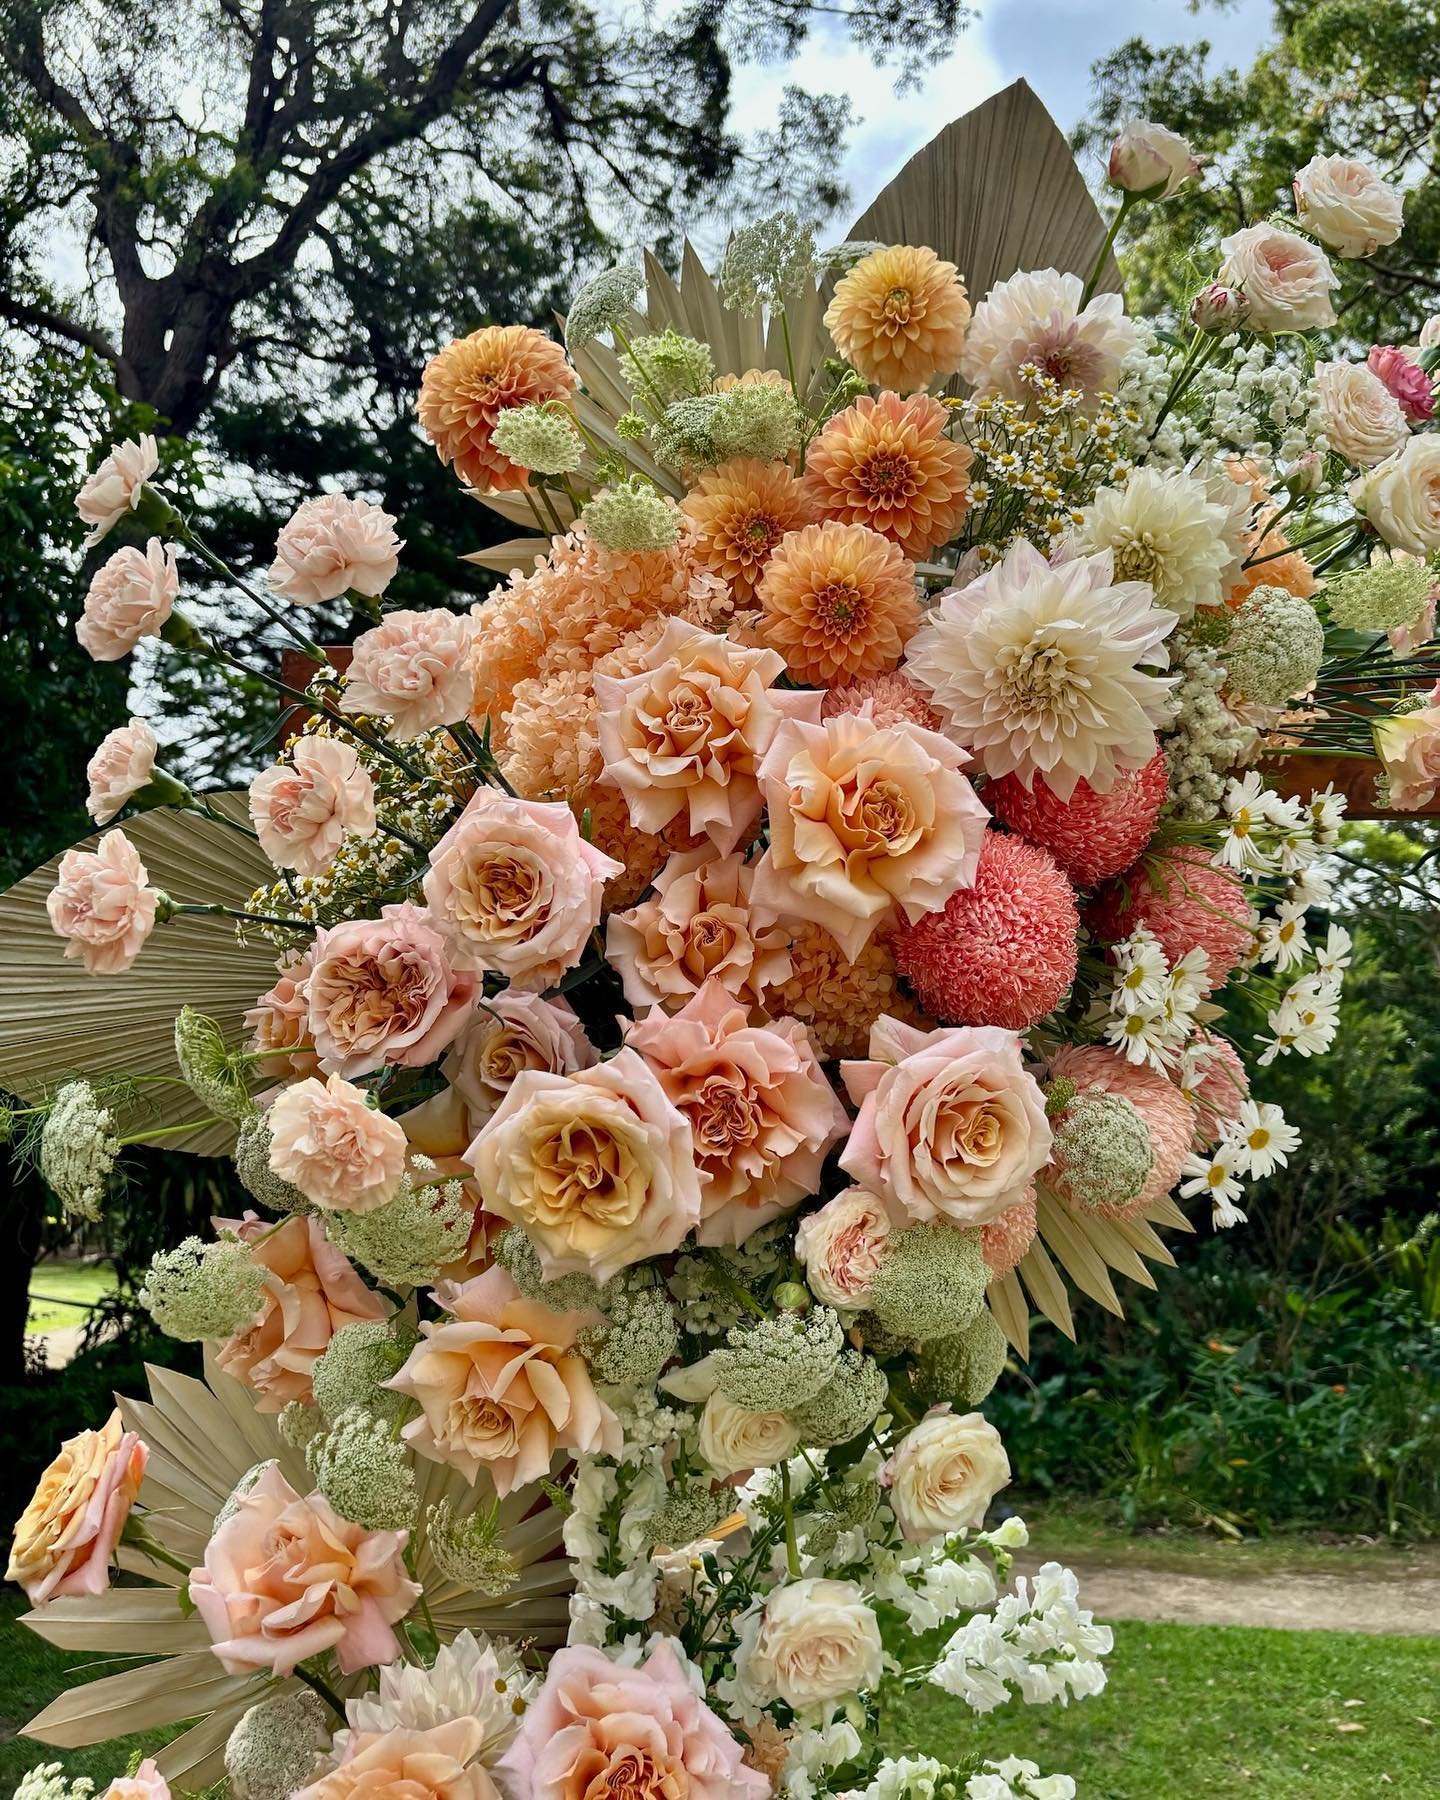 Not too sure what you want when it comes to wedding flowers ?
That&rsquo;s not a problem! 

We at RAIN love getting creative and designing arrangements that are unique to you. We can chat through colour palettes and budgets and then take it from ther